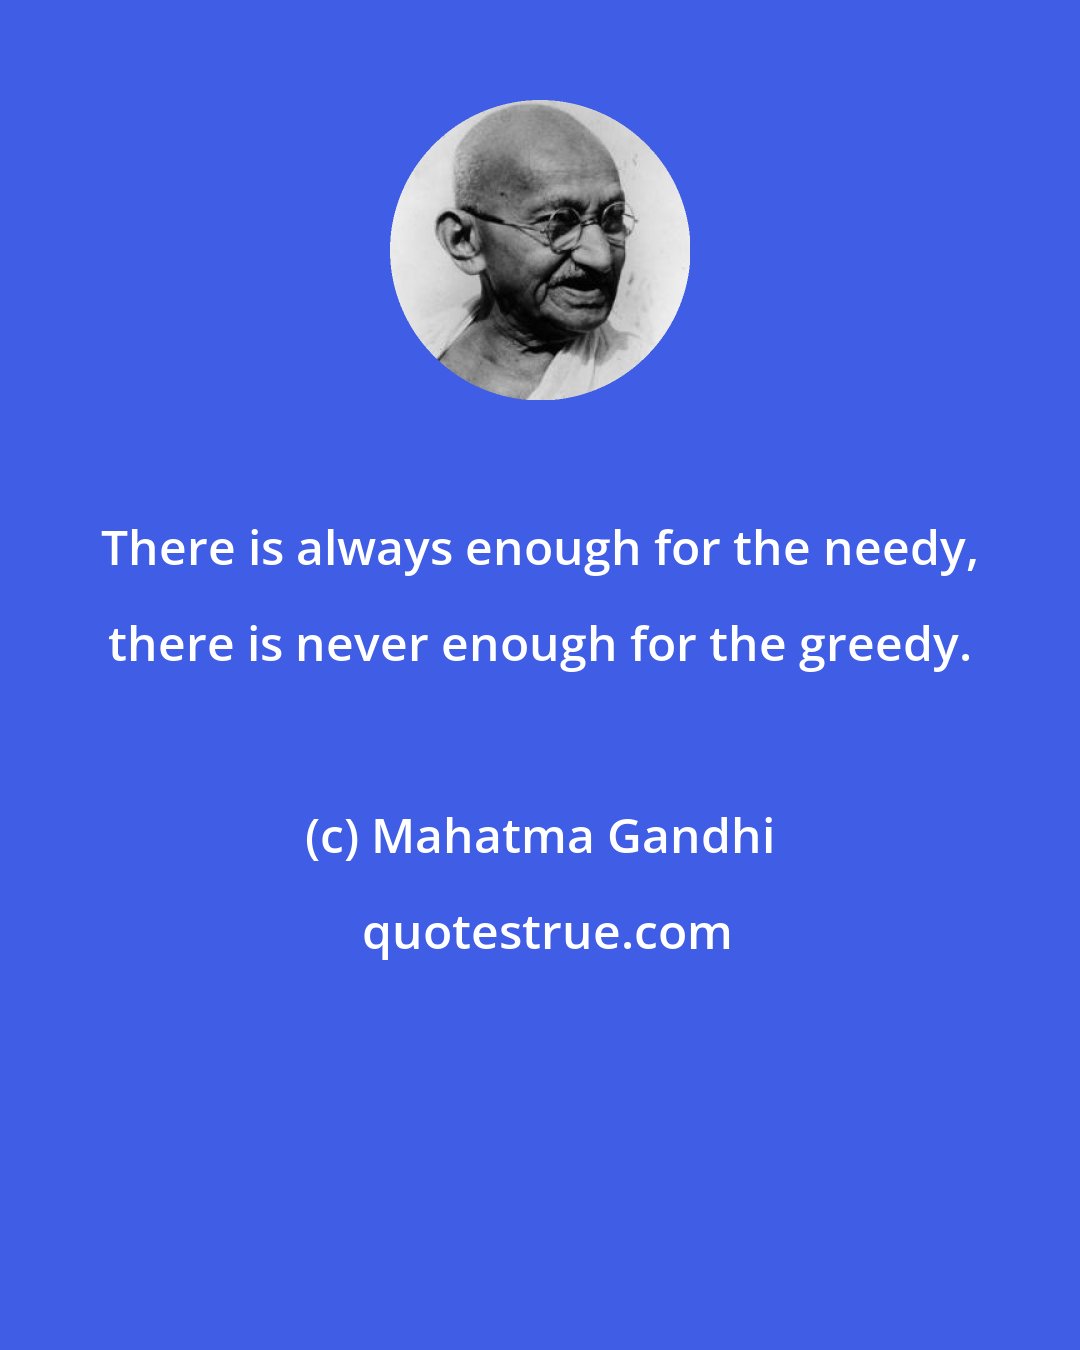 Mahatma Gandhi: There is always enough for the needy, there is never enough for the greedy.